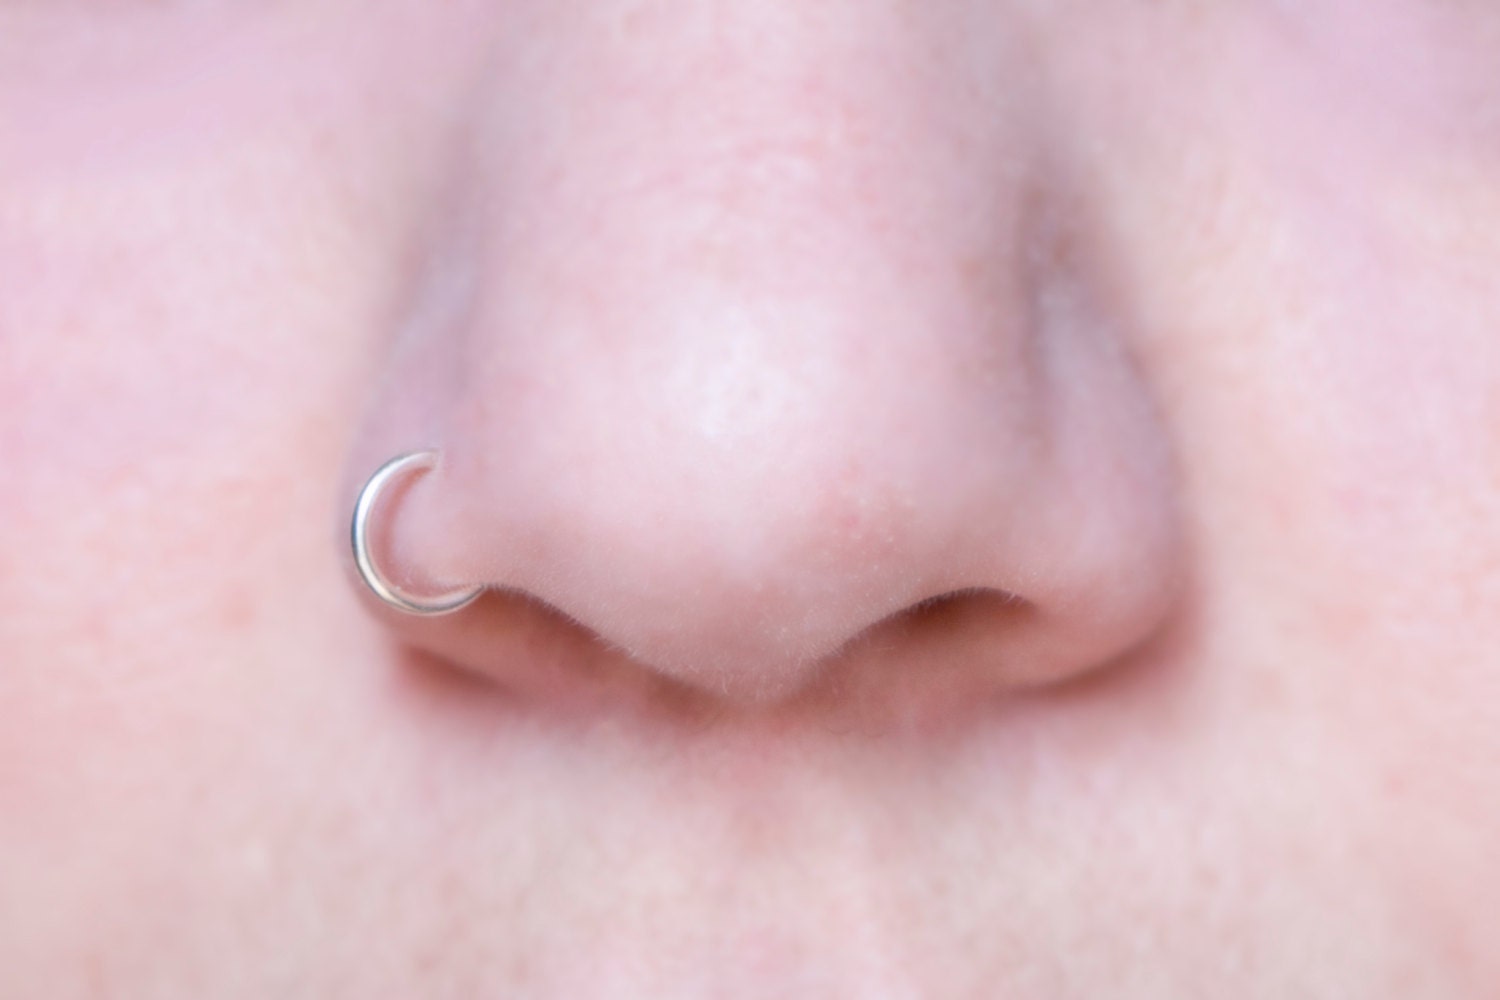 Silver Nose Ring Small Thin Sexy 0.7mm Sterling Nose Hoop- Diameter 6mm,8mm  | eBay